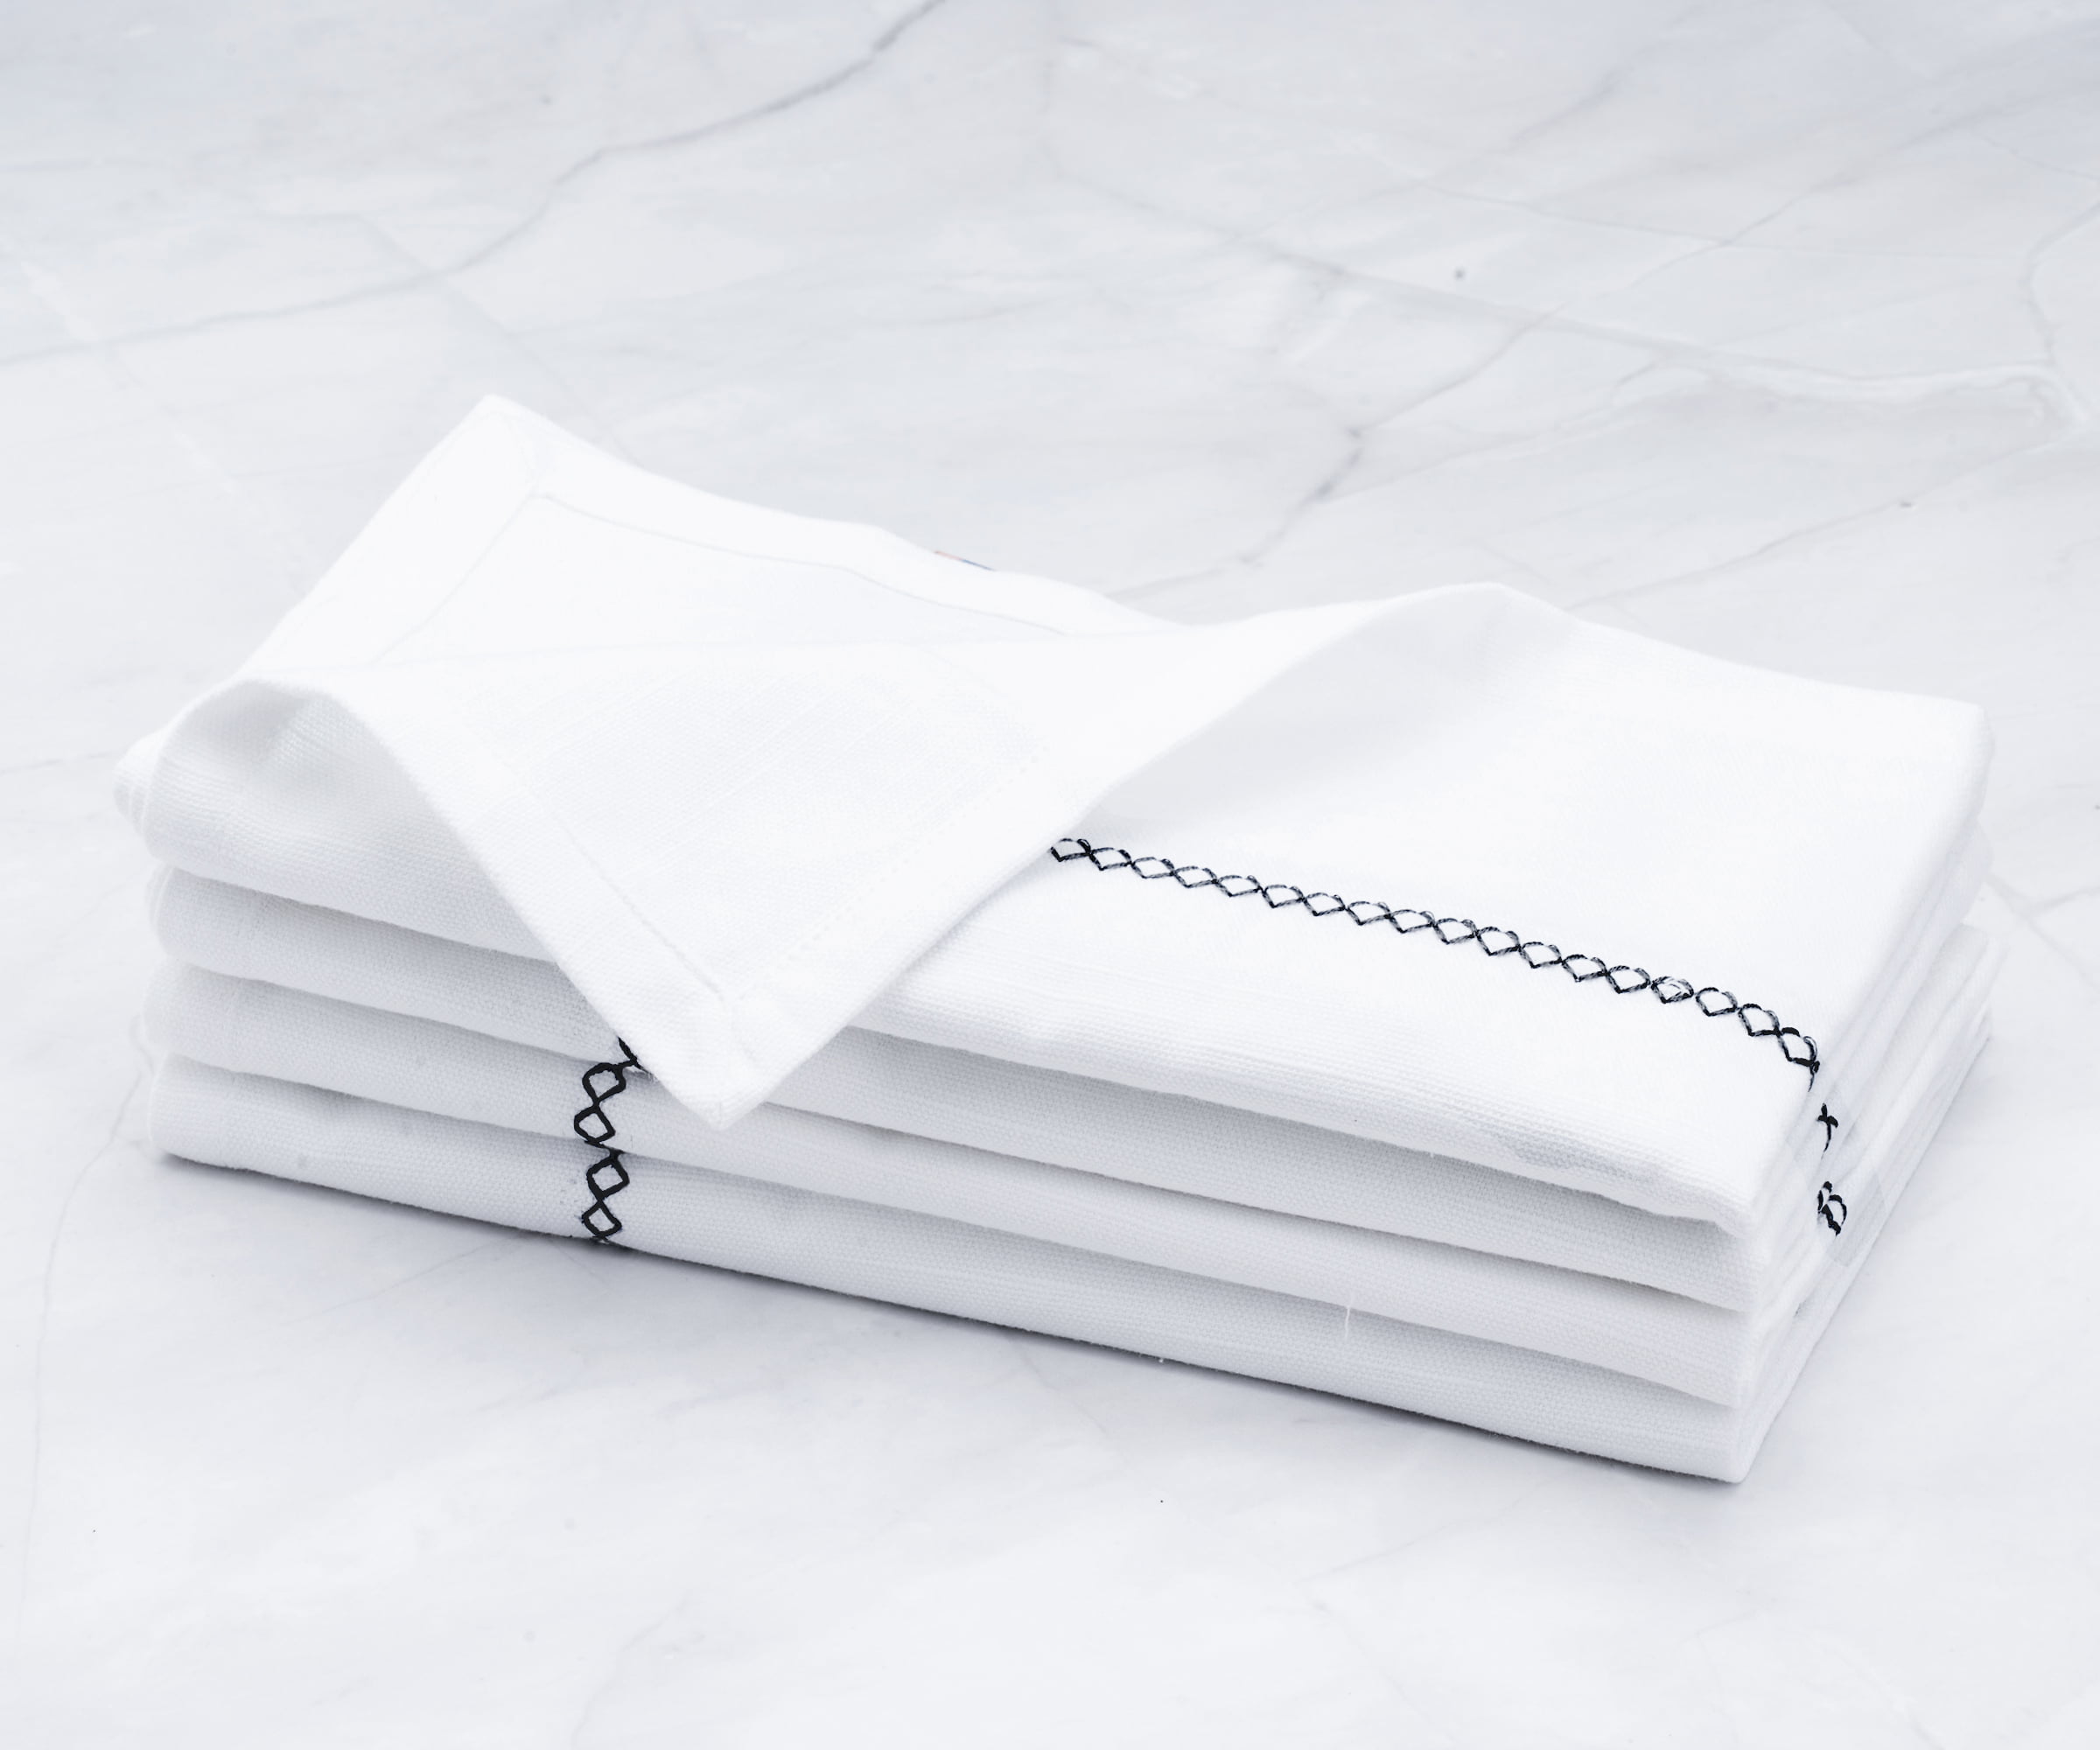 Grayghost Kitchen Cloth Napkins 15.4 X 15.4 Inches Dinner Napkins Soft and  Comfortable Reusable Napkins - Durable Linen Napkins - Perfect Table Napkins  / White Napkins for Family Dinners, Weddings. 